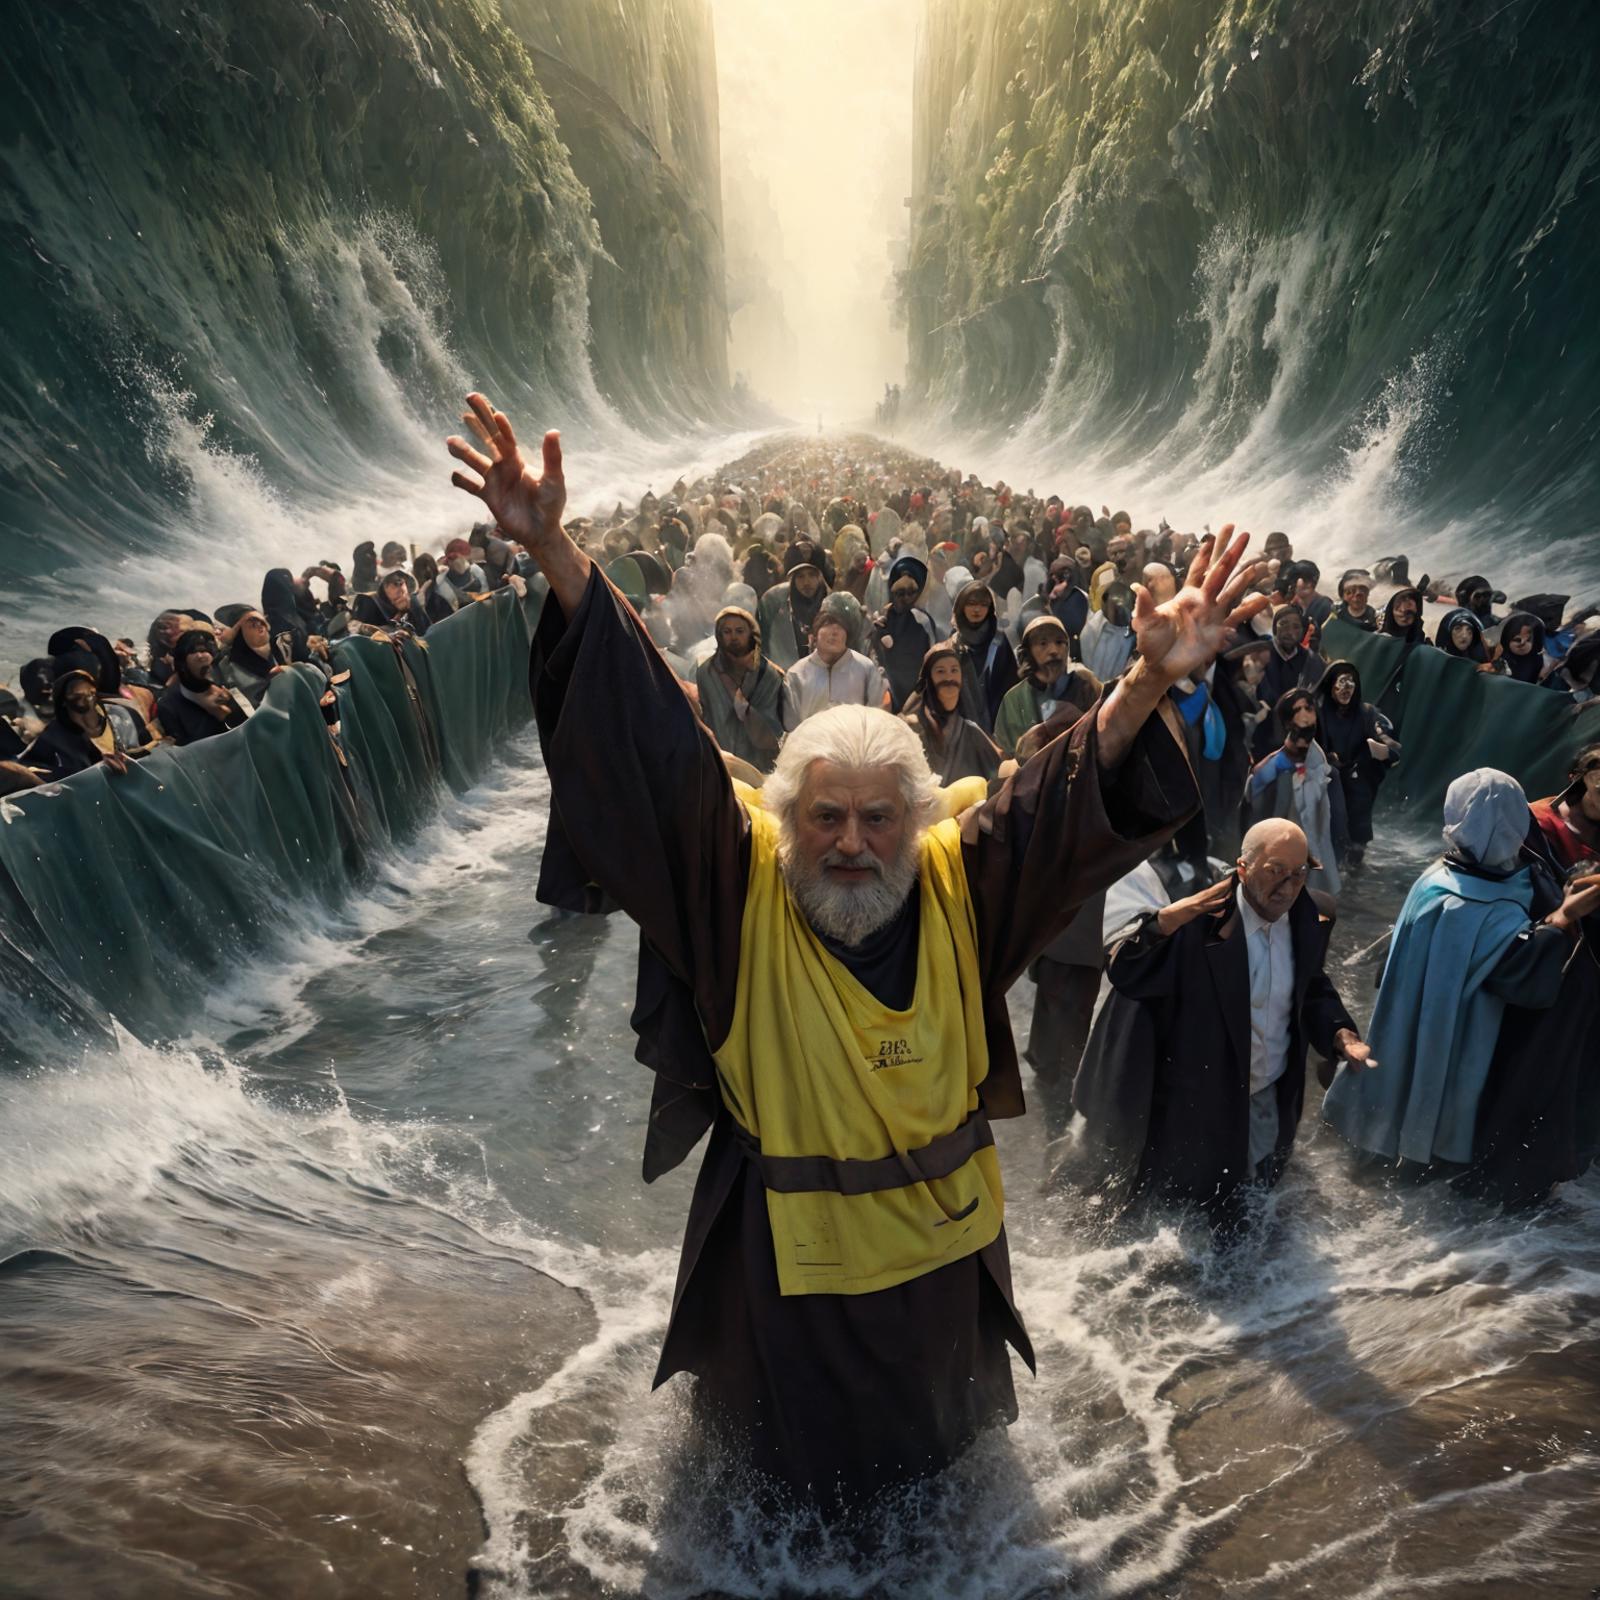 The artistic depiction of a man in a yellow vest leading a crowd of people through a river.